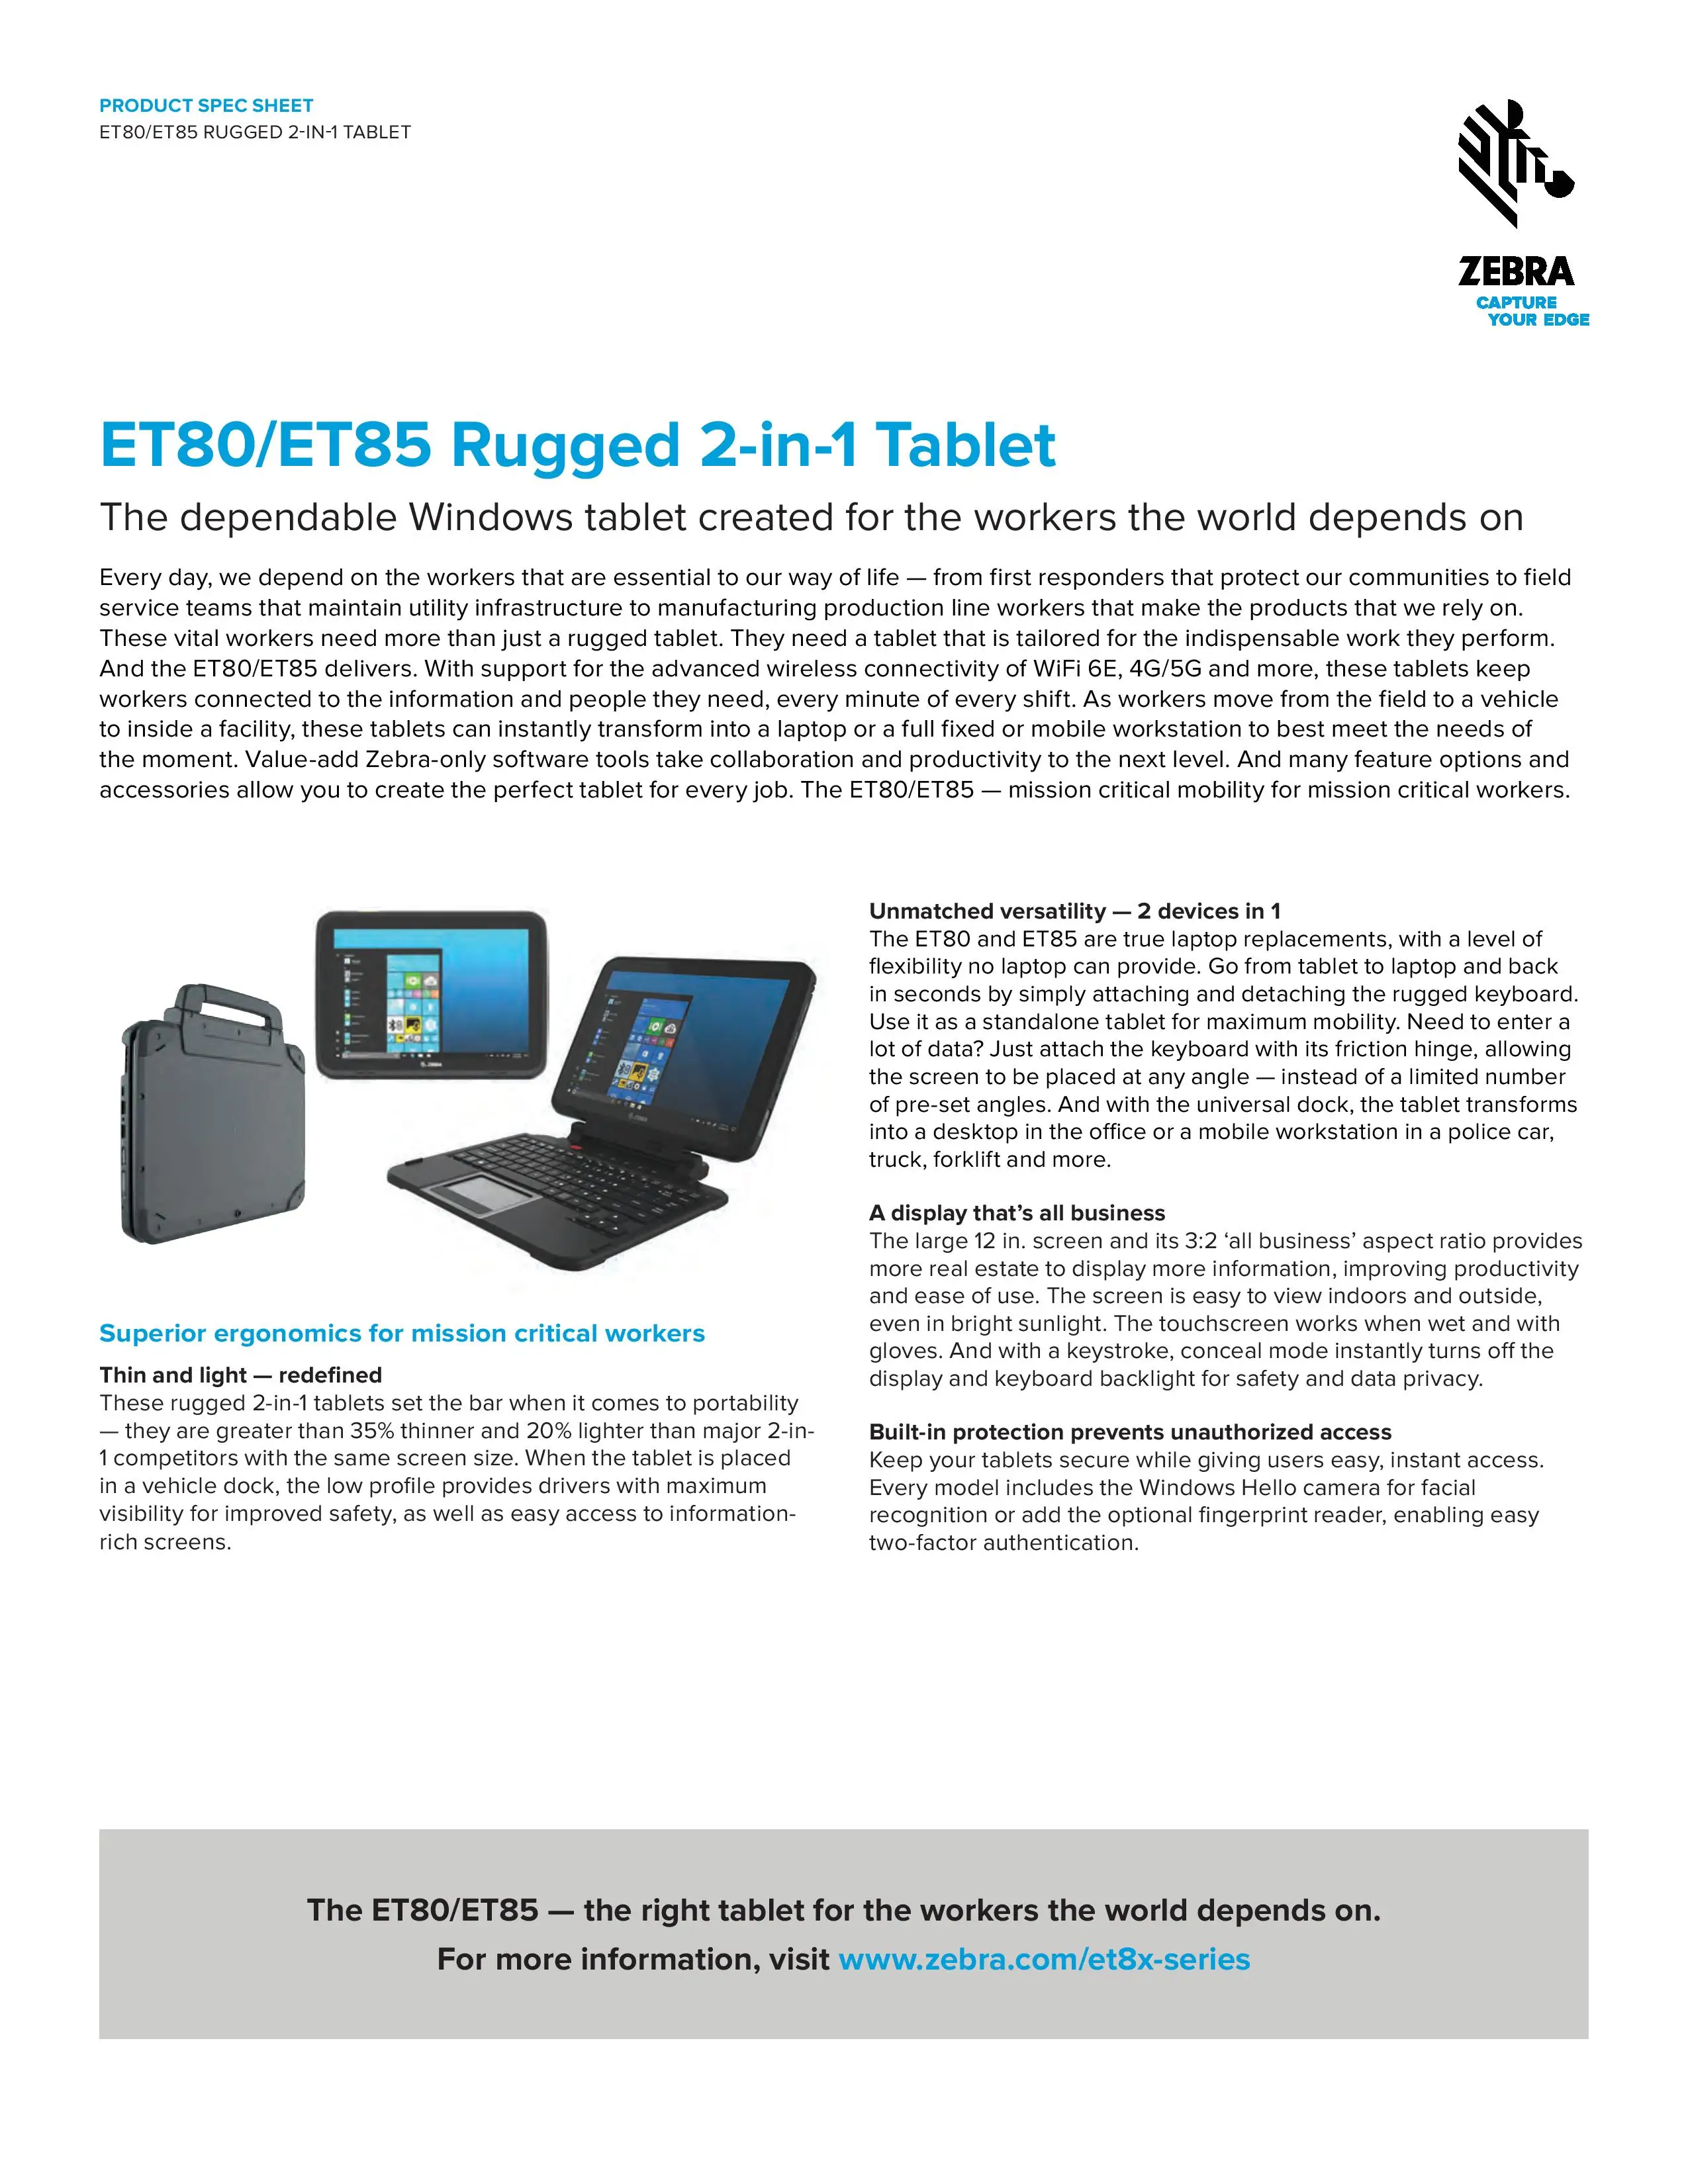 NEW PRODUCT!!! ET80/ET85 RUGGED 2-IN-1 TABLET - THE DEPENDABLE WINDOWS TABLET CREATED FOR THE WORKERS